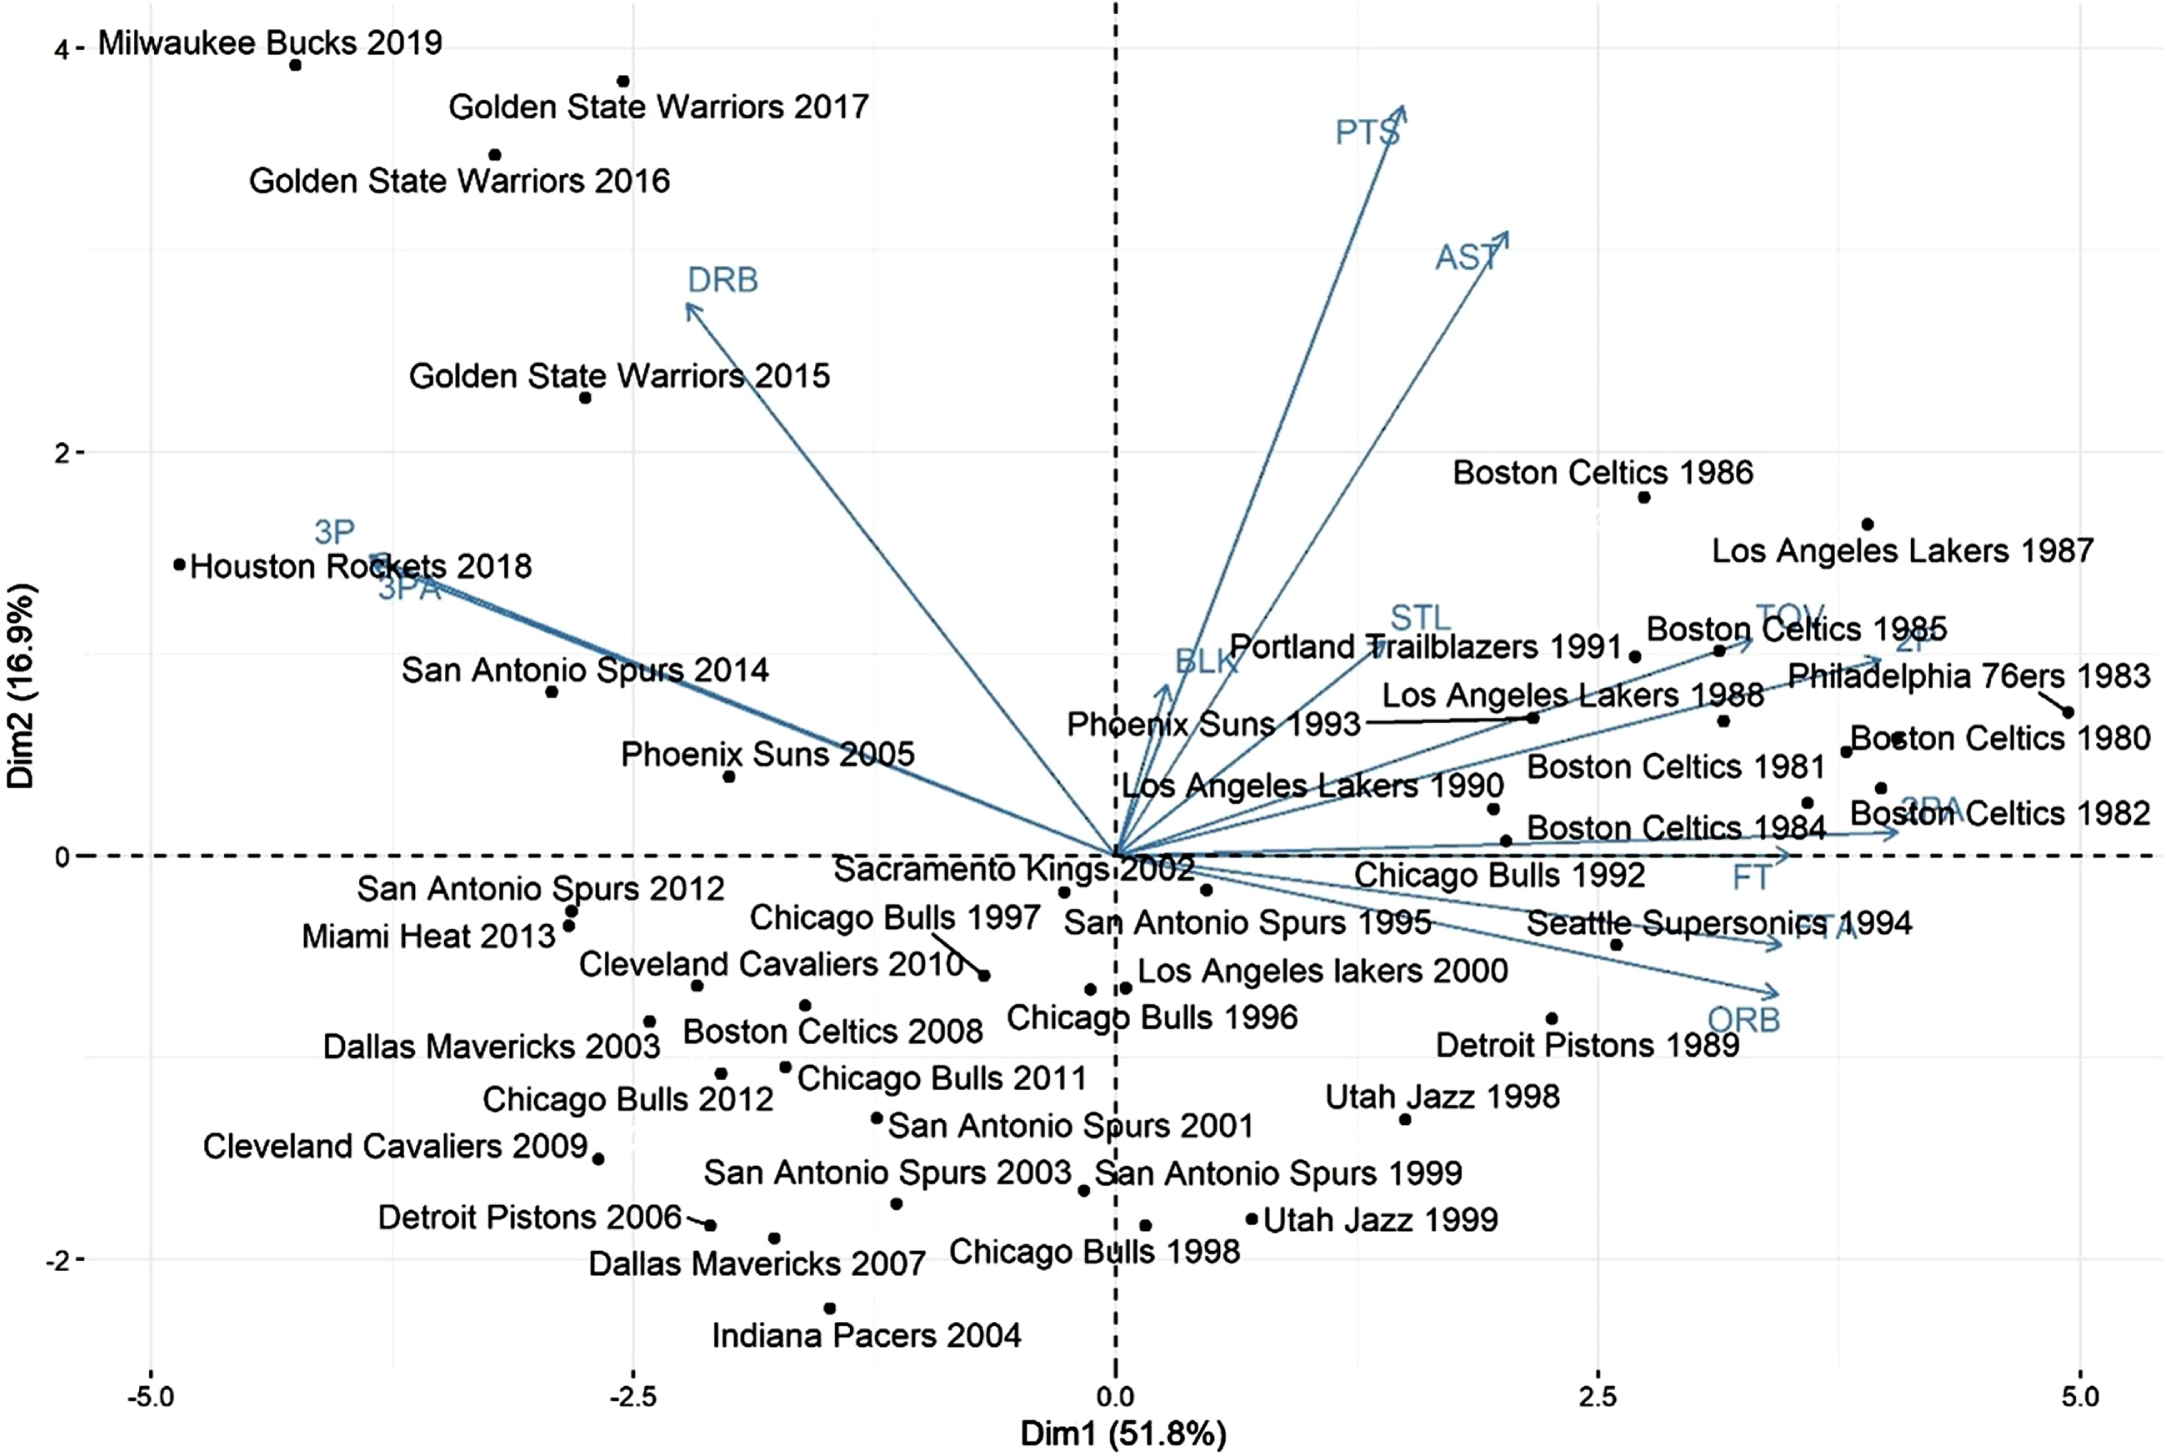 Biplot with the first two principal components, considering the data for all regular season winning teams, from 1980 to 2019.